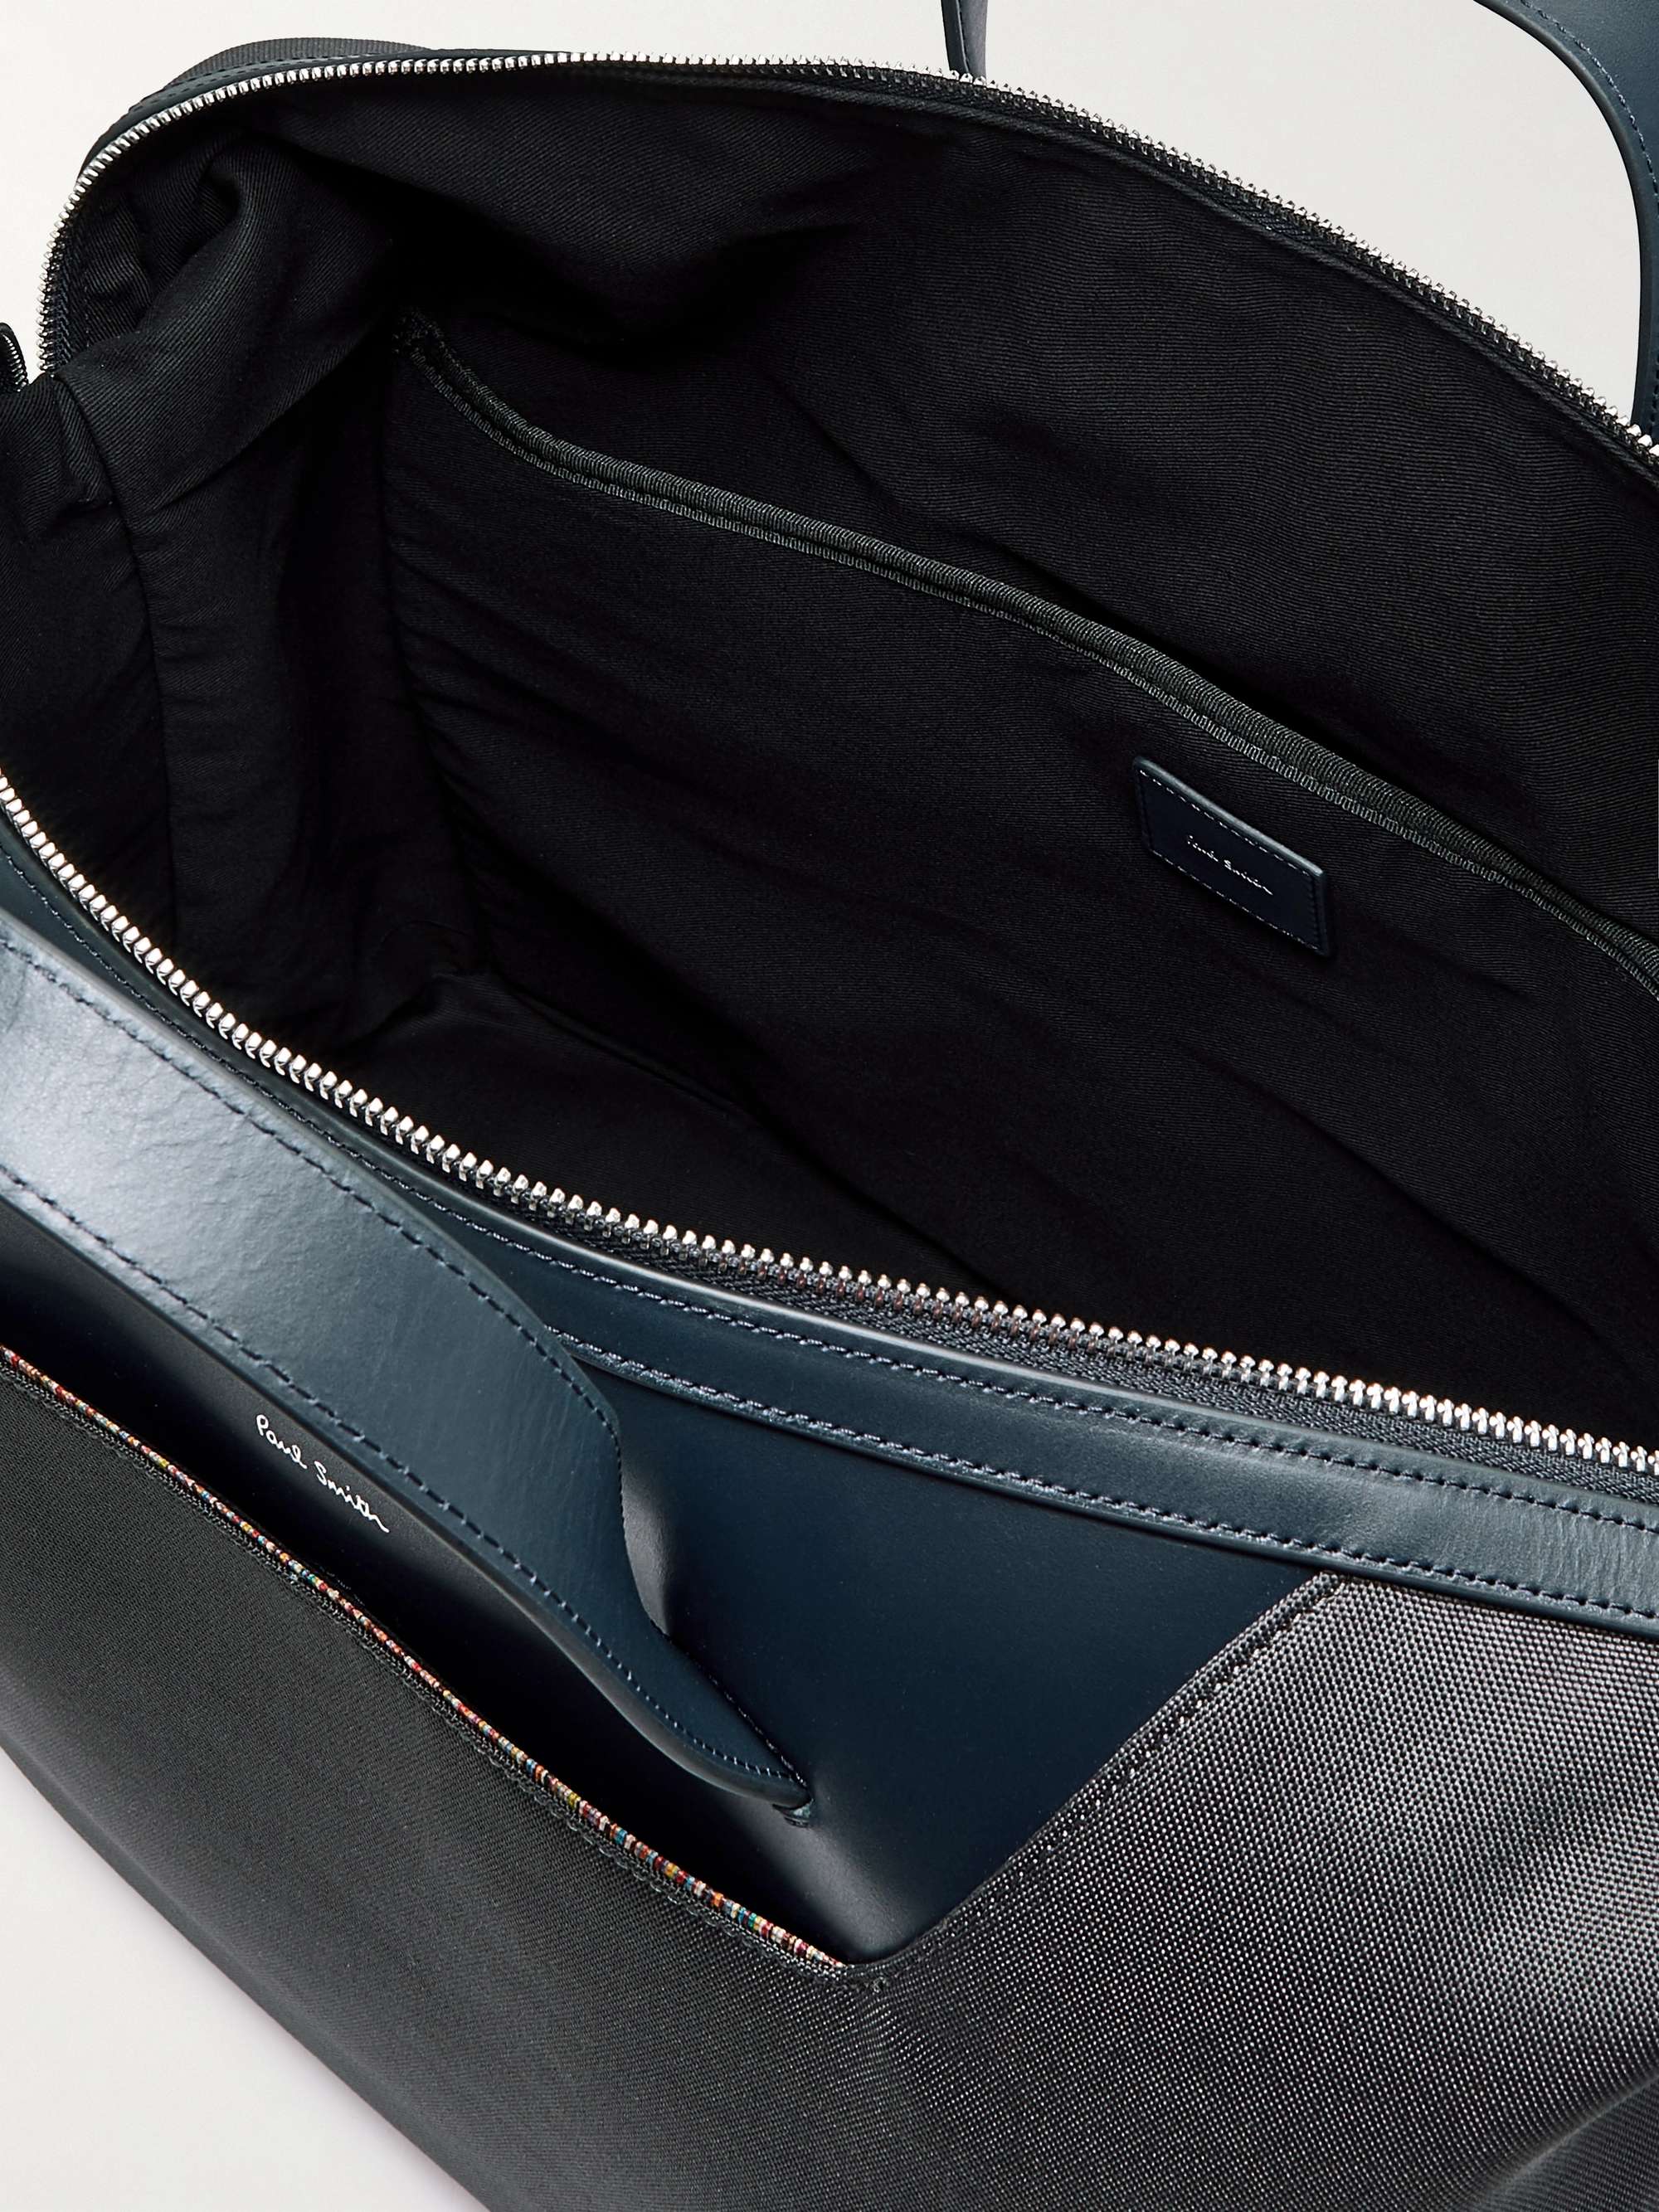 PAUL SMITH Leather-Trimmed Canvas Holdall